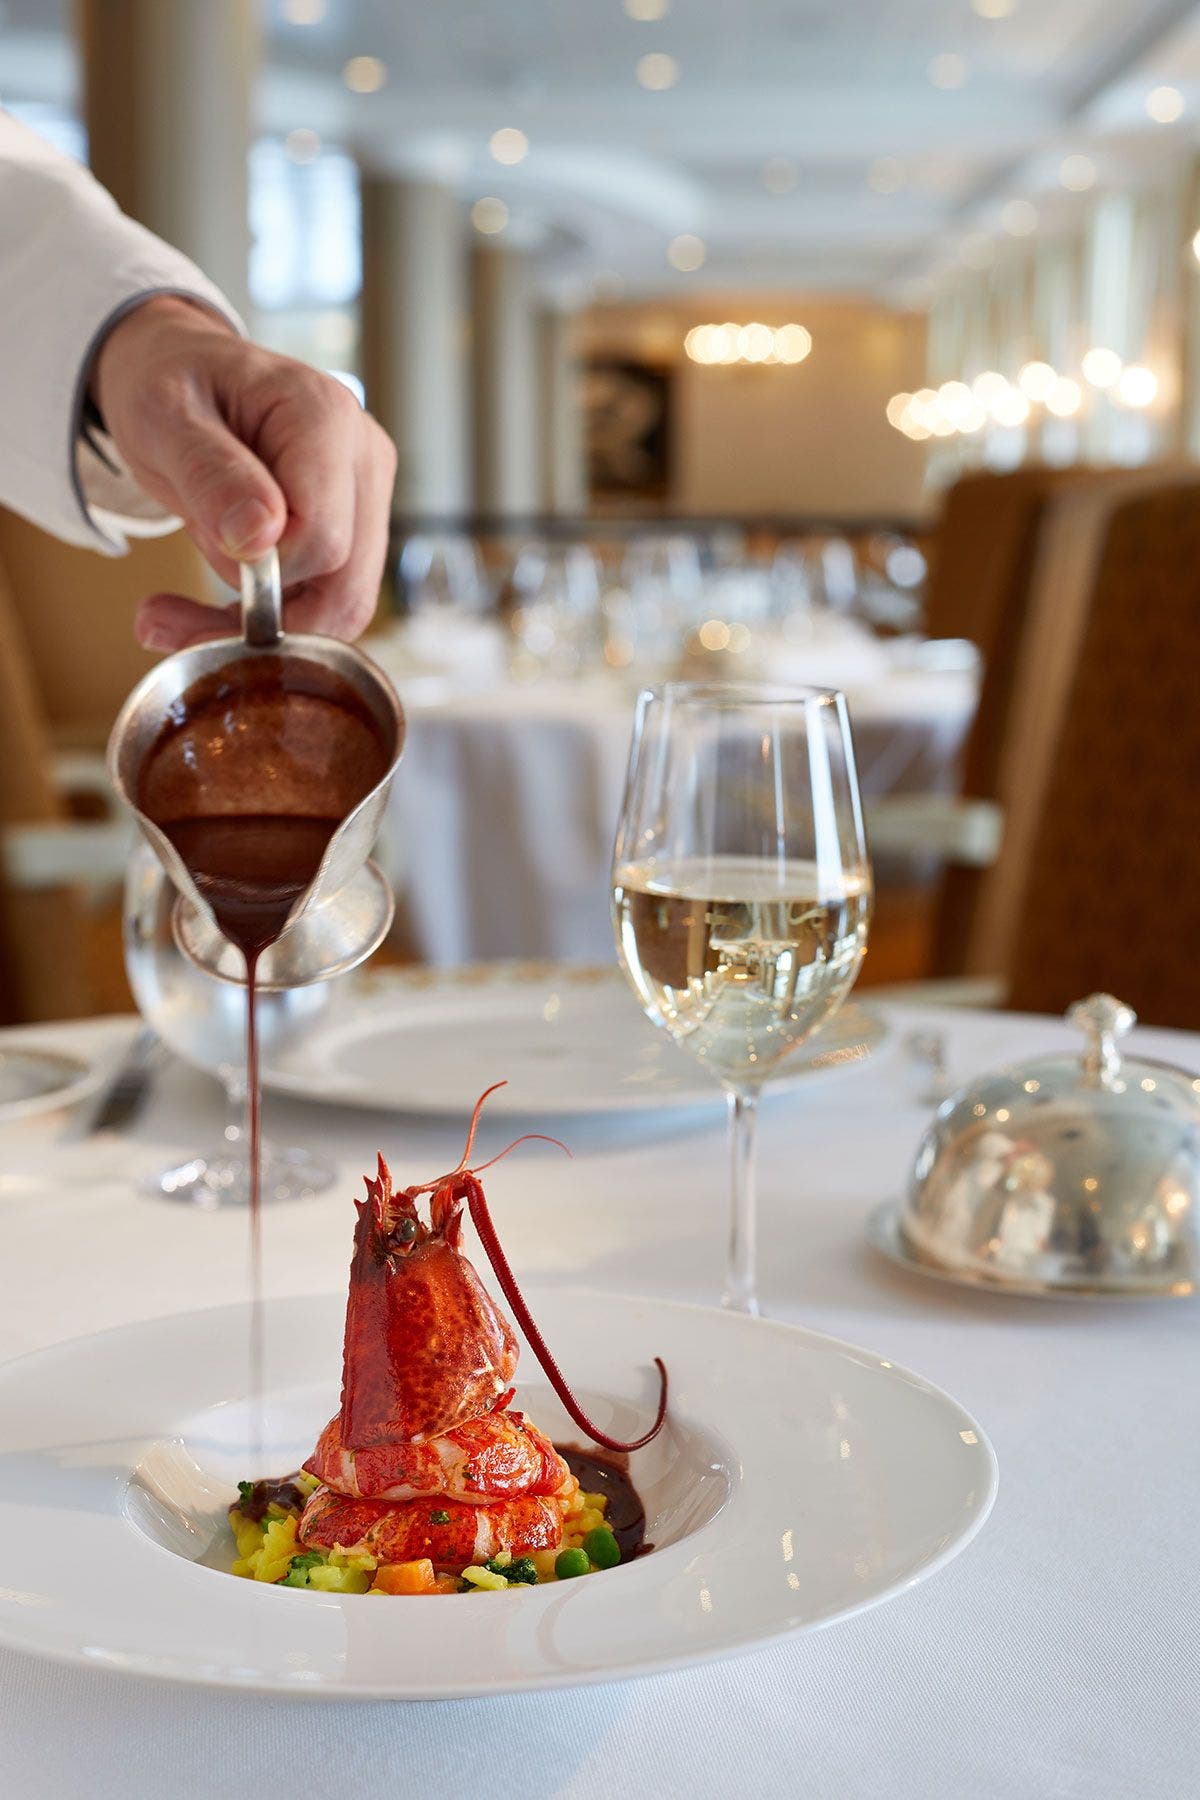 Lobster Risotto. Foto: Oceania Cruises.